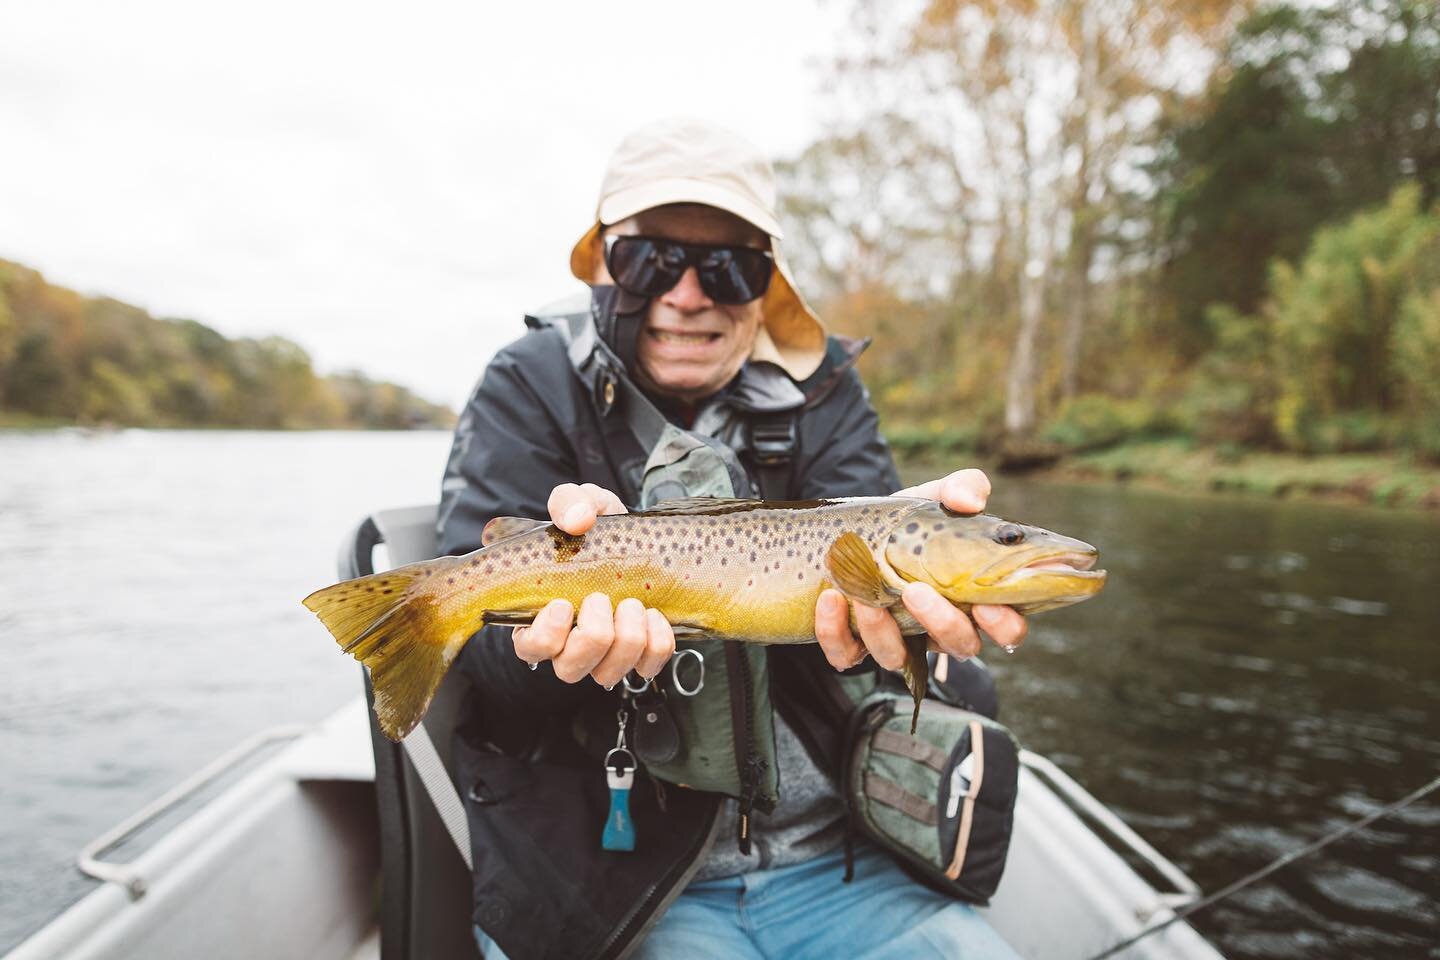 Richard fished three days with me last week in the cold, rainy weather and didn&rsquo;t miss a beat. I always enjoy the old guys so much because they don&rsquo;t care at all about posting their pictures or how many people will like them. He just real